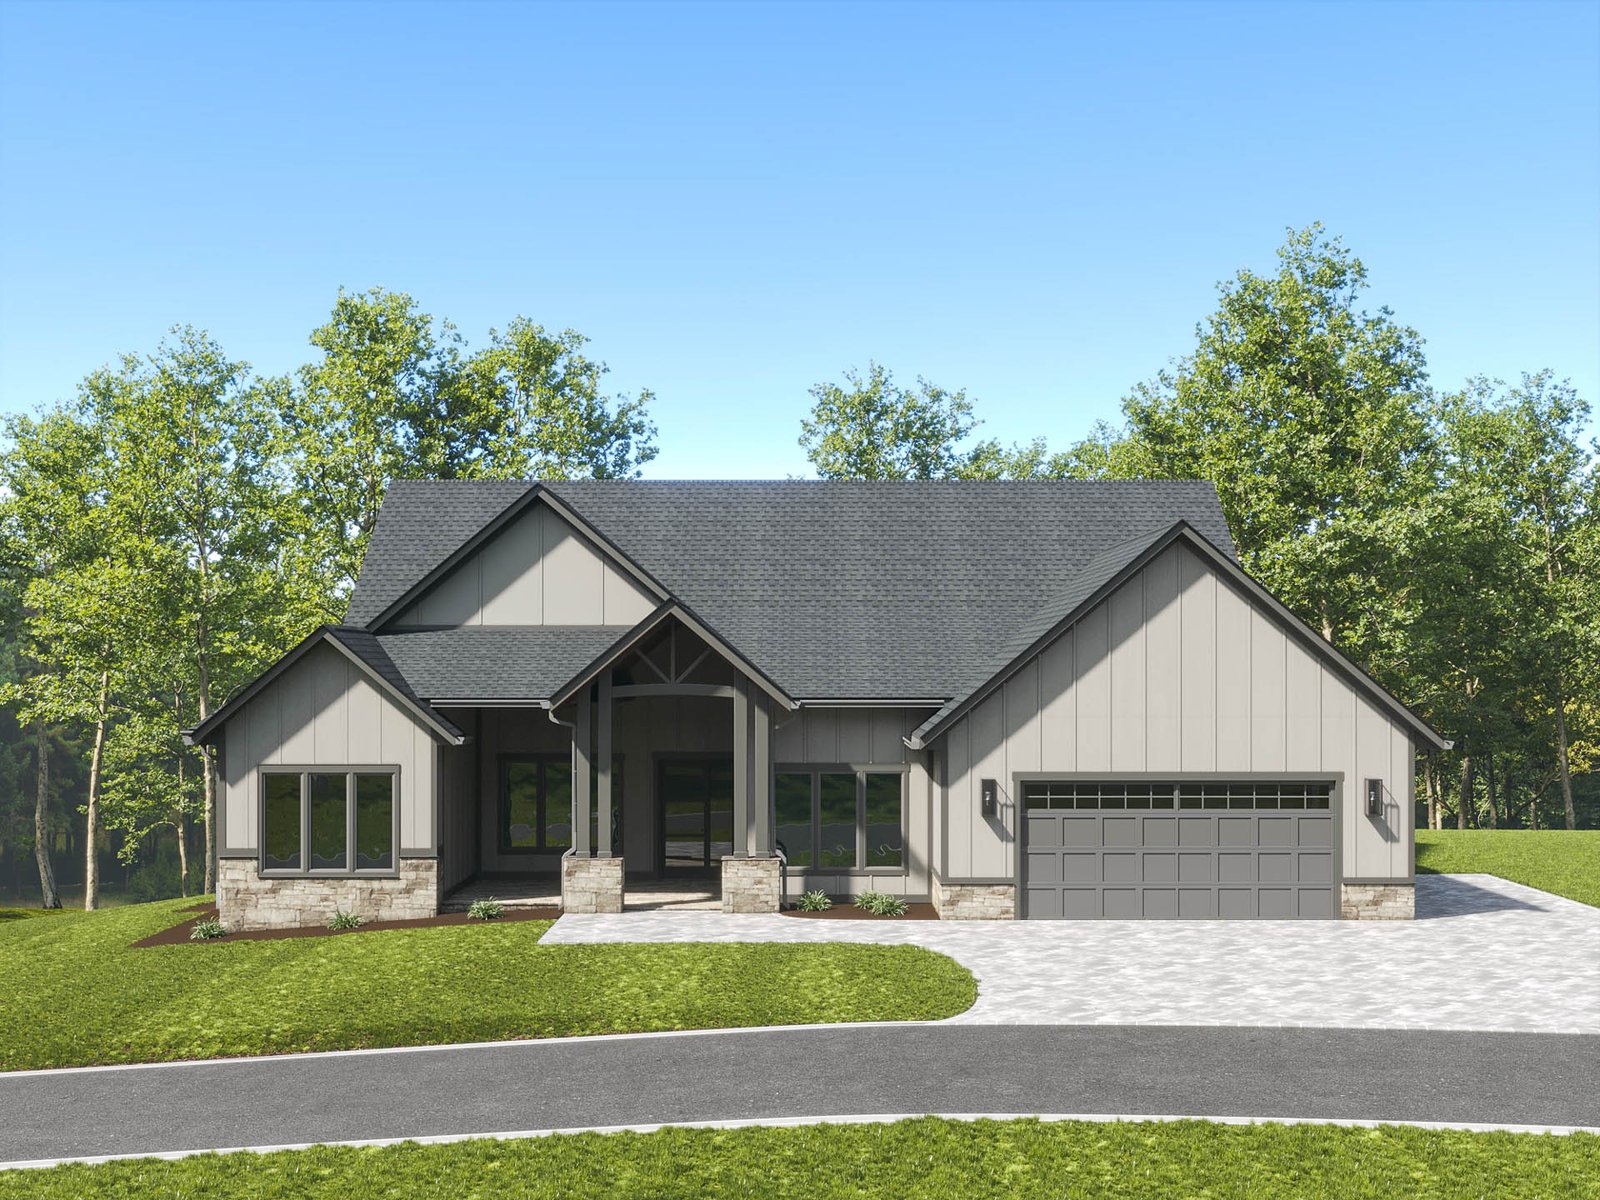 New House in Horse Shoe, NC. Lot #11, 2833 Brannon Rd 28742. Big Hills at Horse Shoe New Houses in Asheville, North Carolina